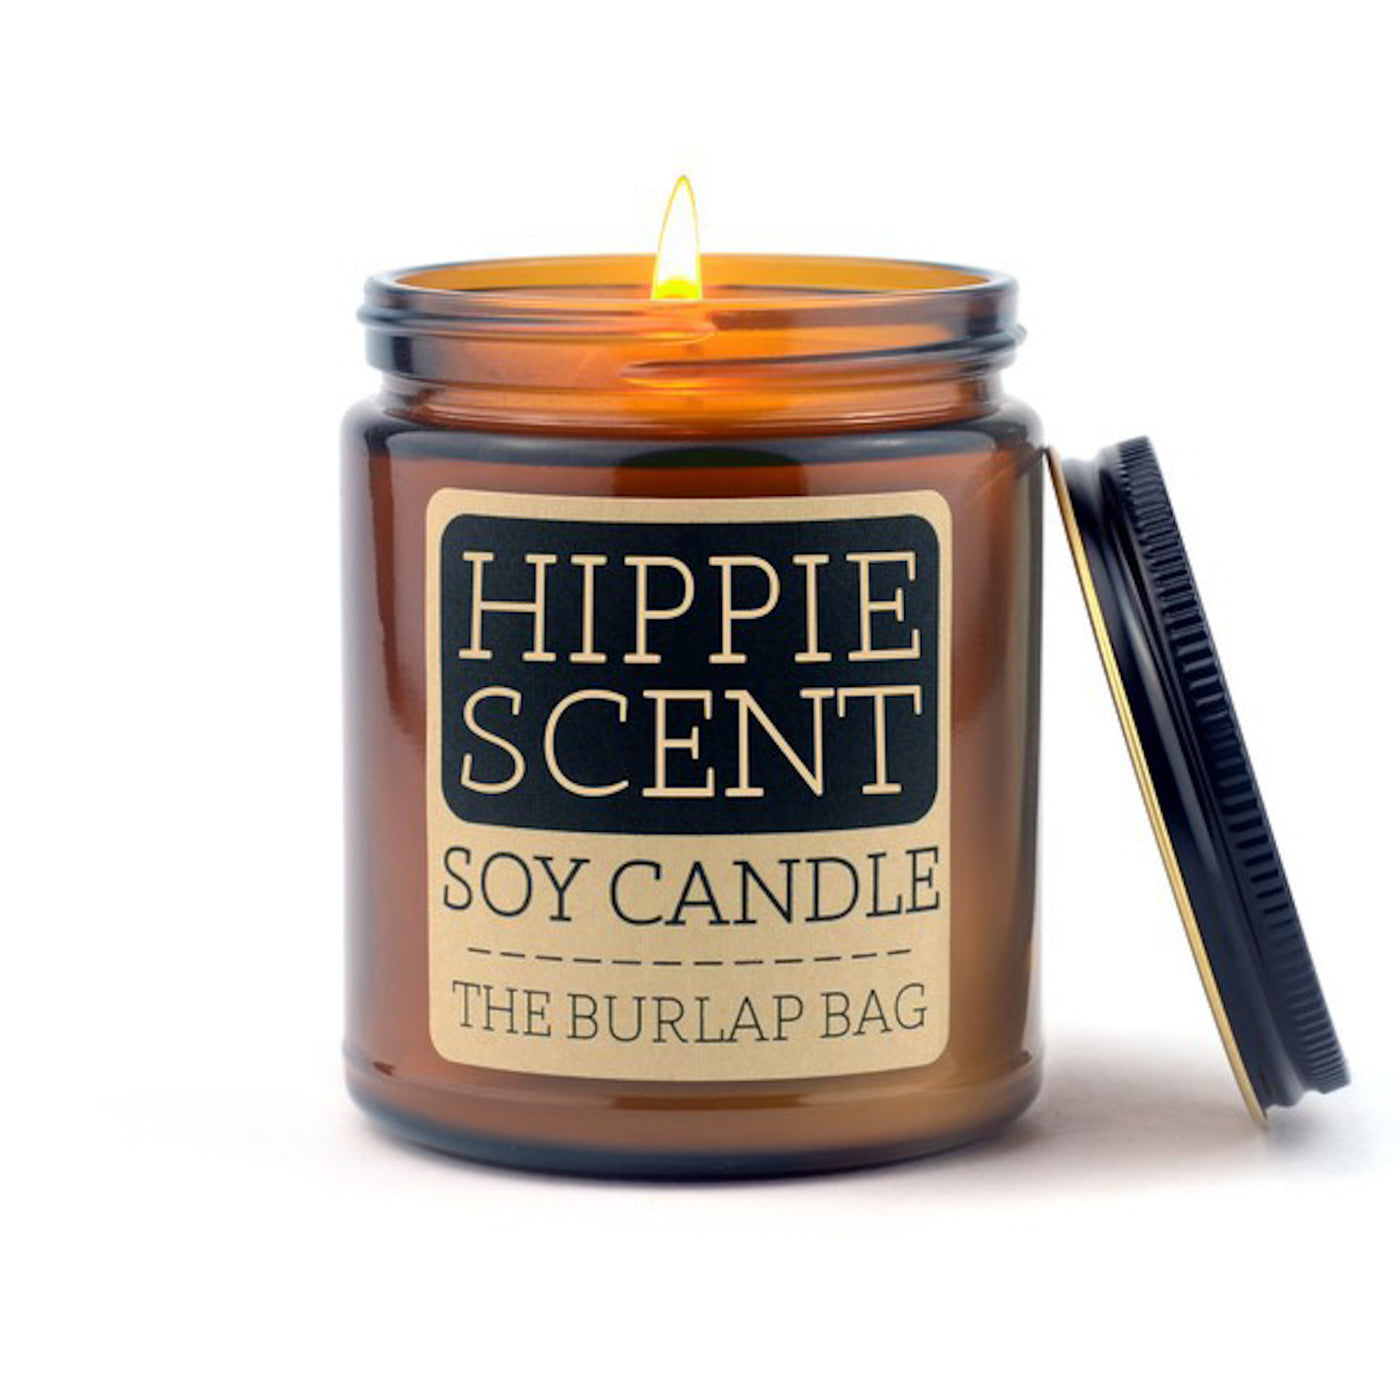 Hippie Scent-Soy Candle